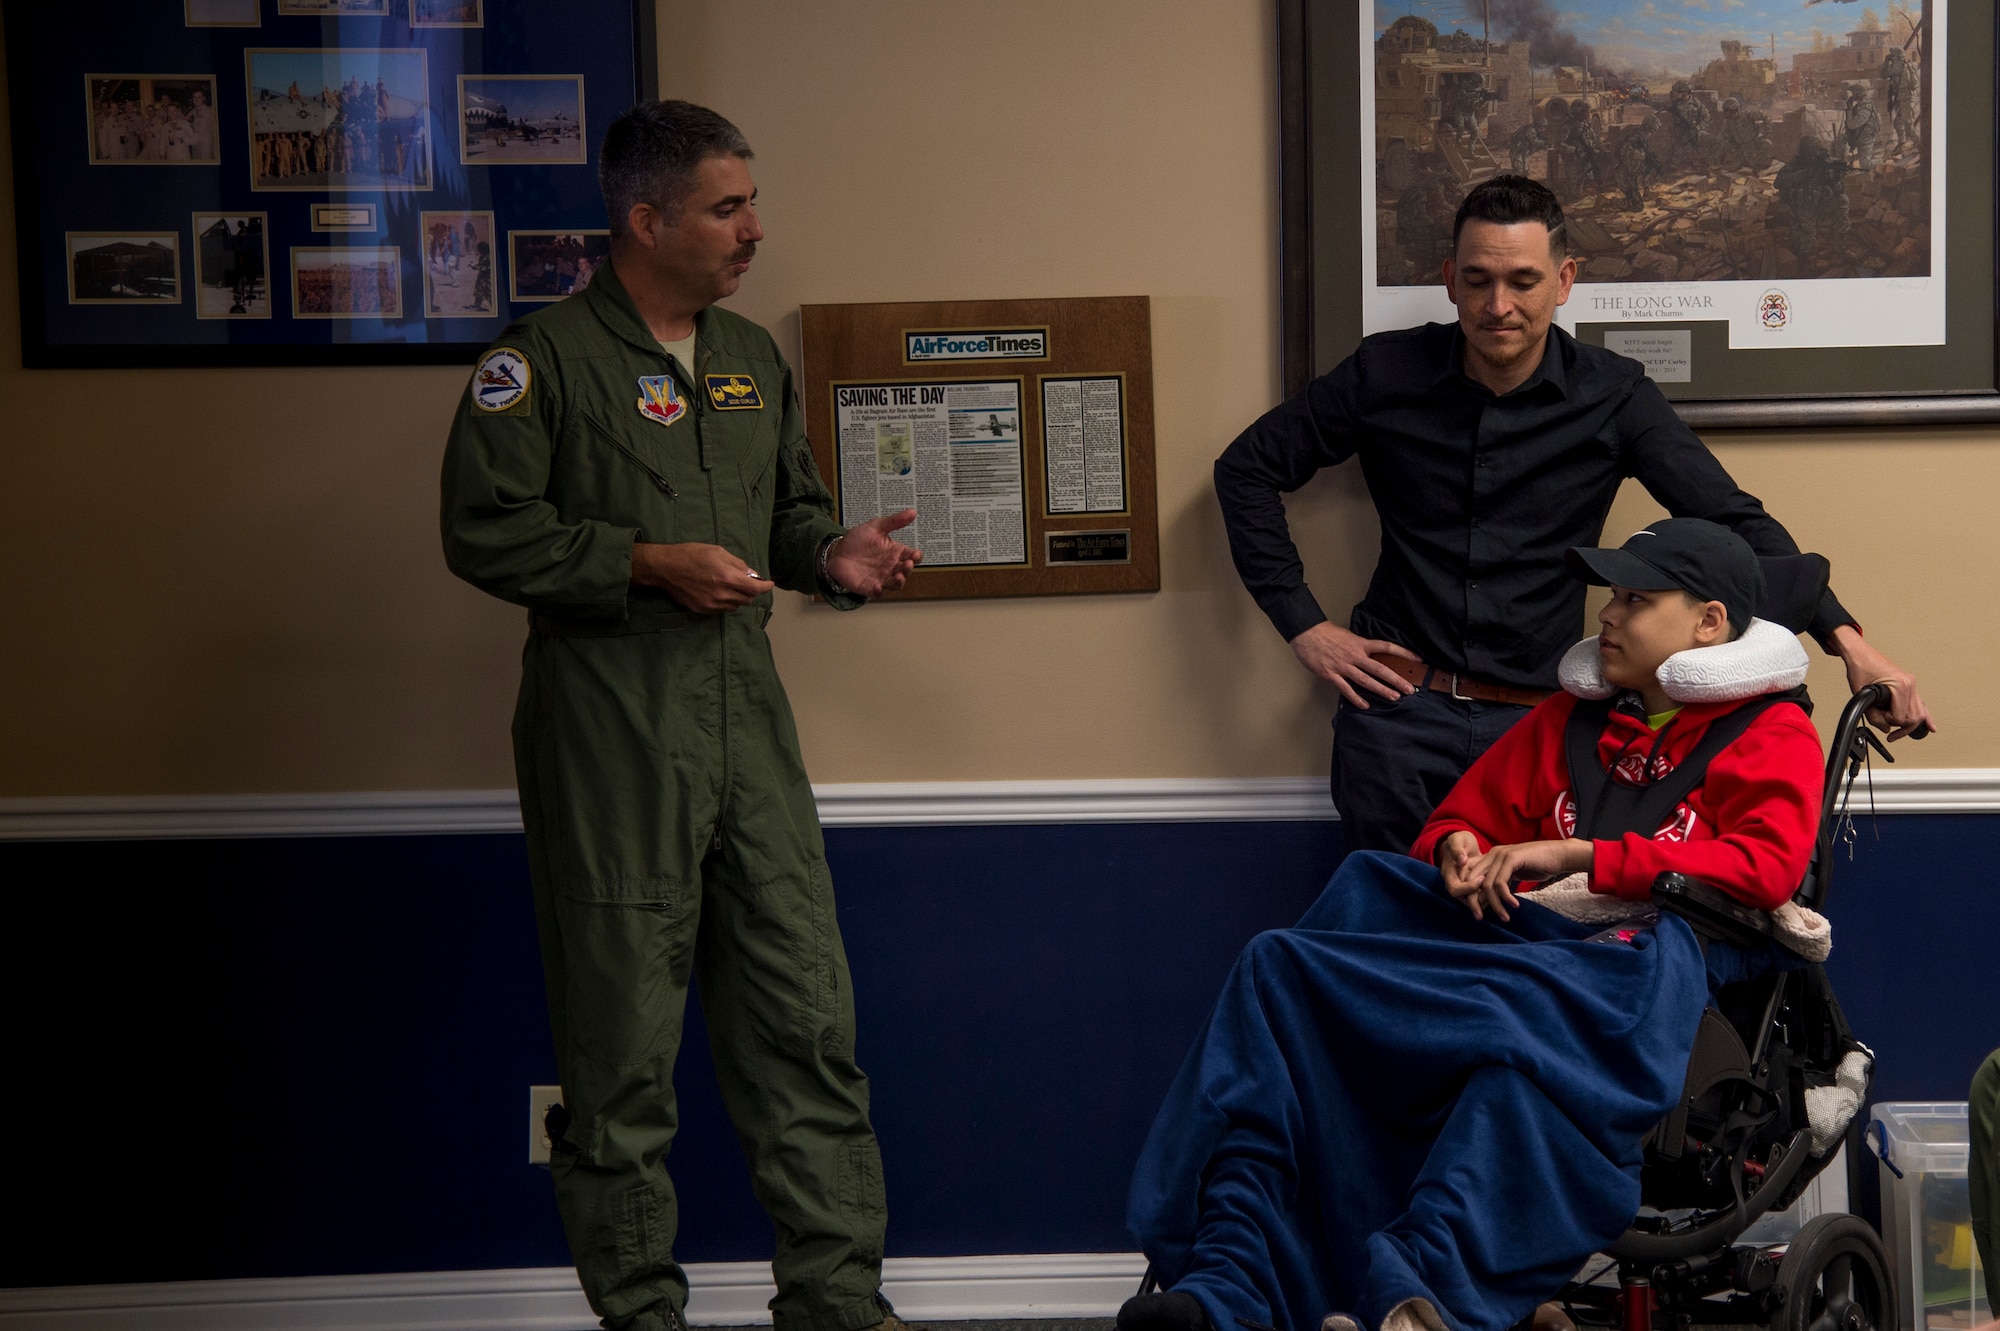 Col. Michael Curely, 23d Figther Group commander, presents 15-year-old Jarod Story with a 23d Wing coin, at Moody Air Force Base, Ga., March 14. Pilots from the 23d Fighter Group made Storey, who is terminally ill with Osteosarcoma, a rare form of bone cancer, an honorary A-10C Thunderbolt II pilot for a day. (U.S. Air Force photo by Andrea Jenkins)